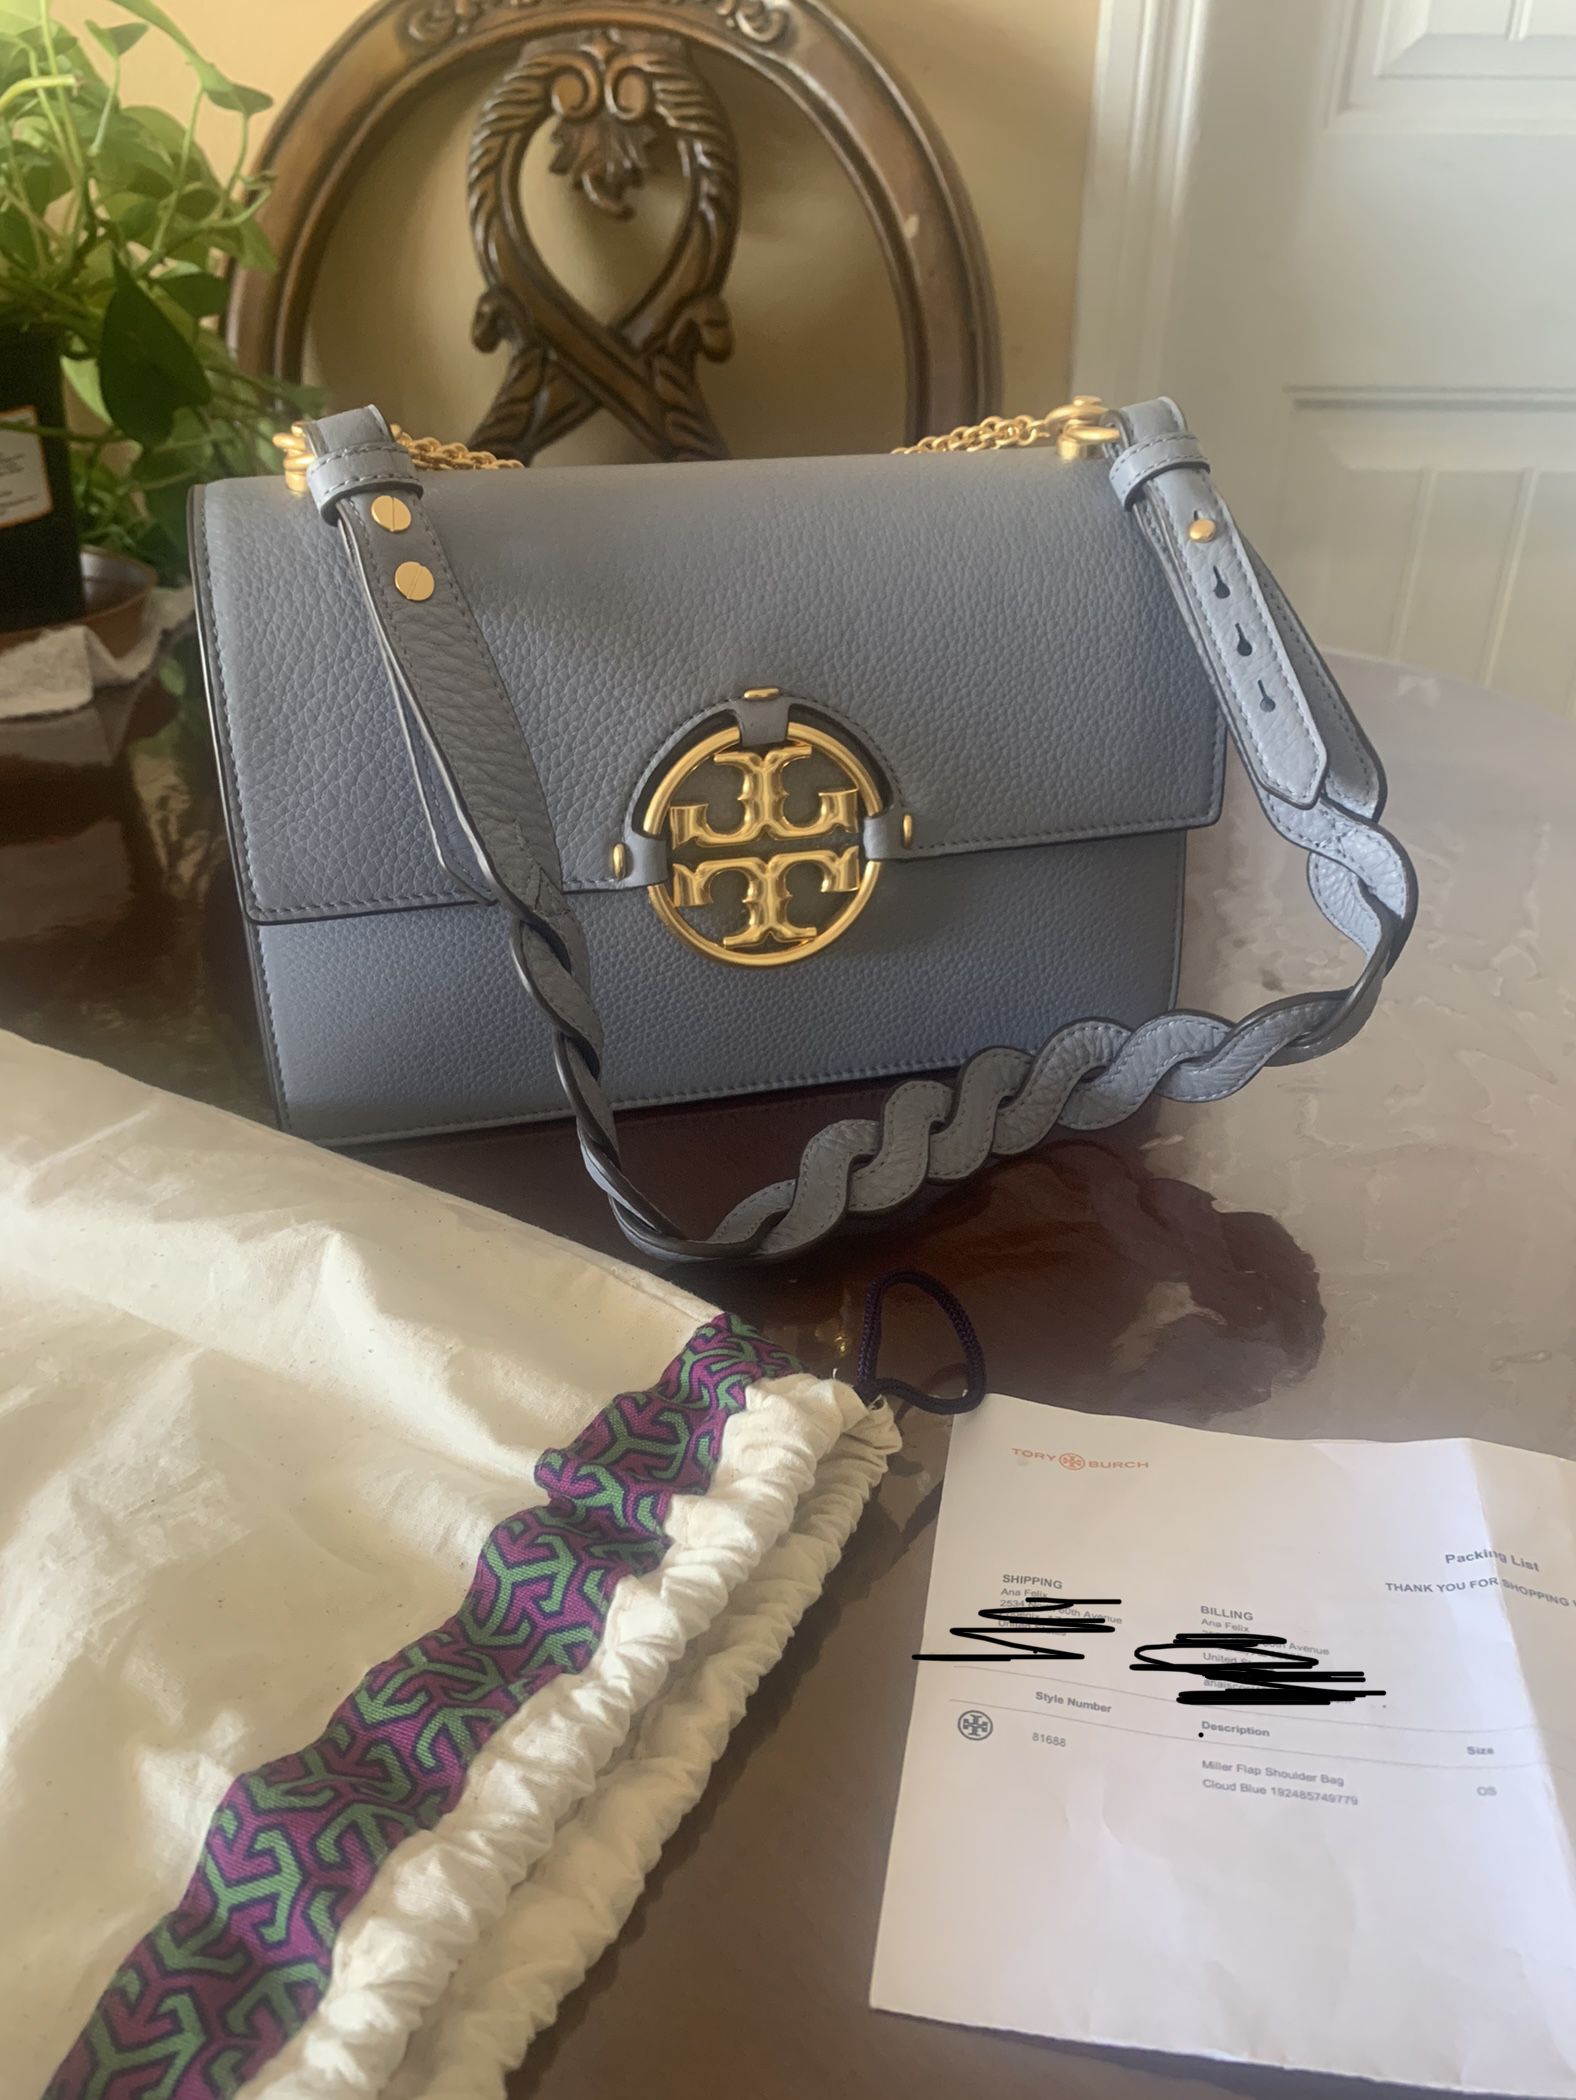 Tory Burch purse for Sale in Laveen Village, AZ - OfferUp